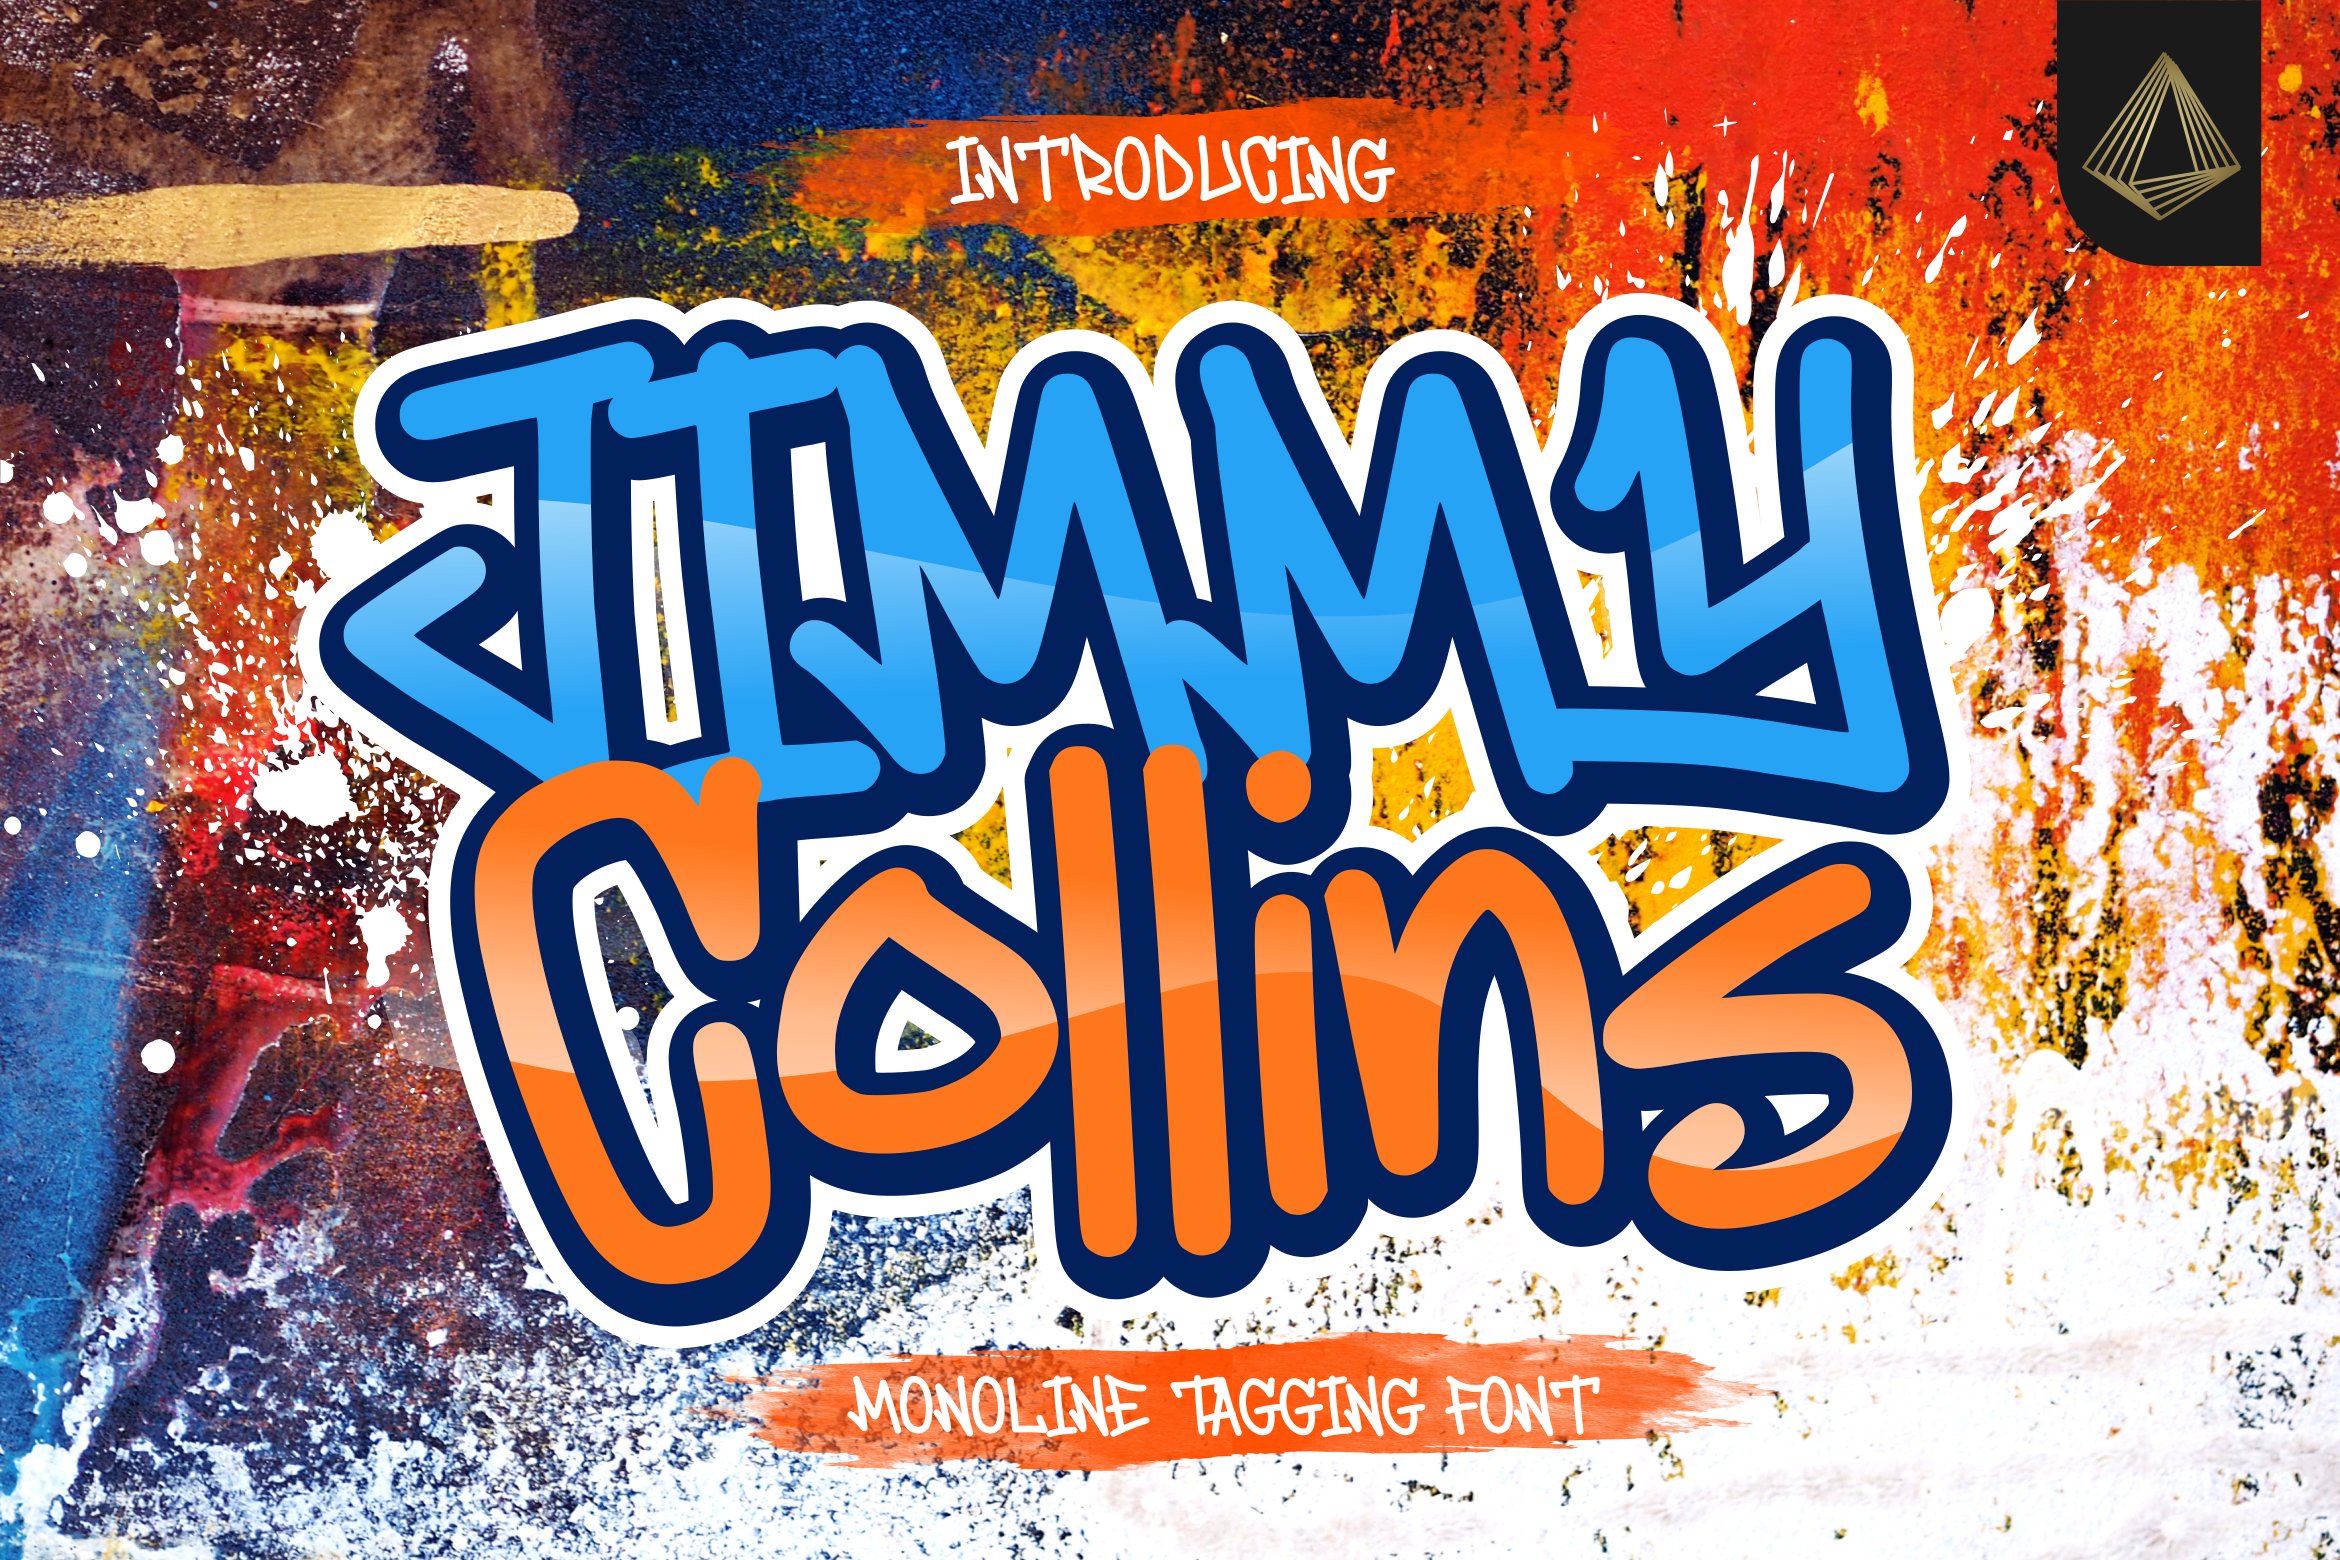 Jimmy Collins Font cover image.